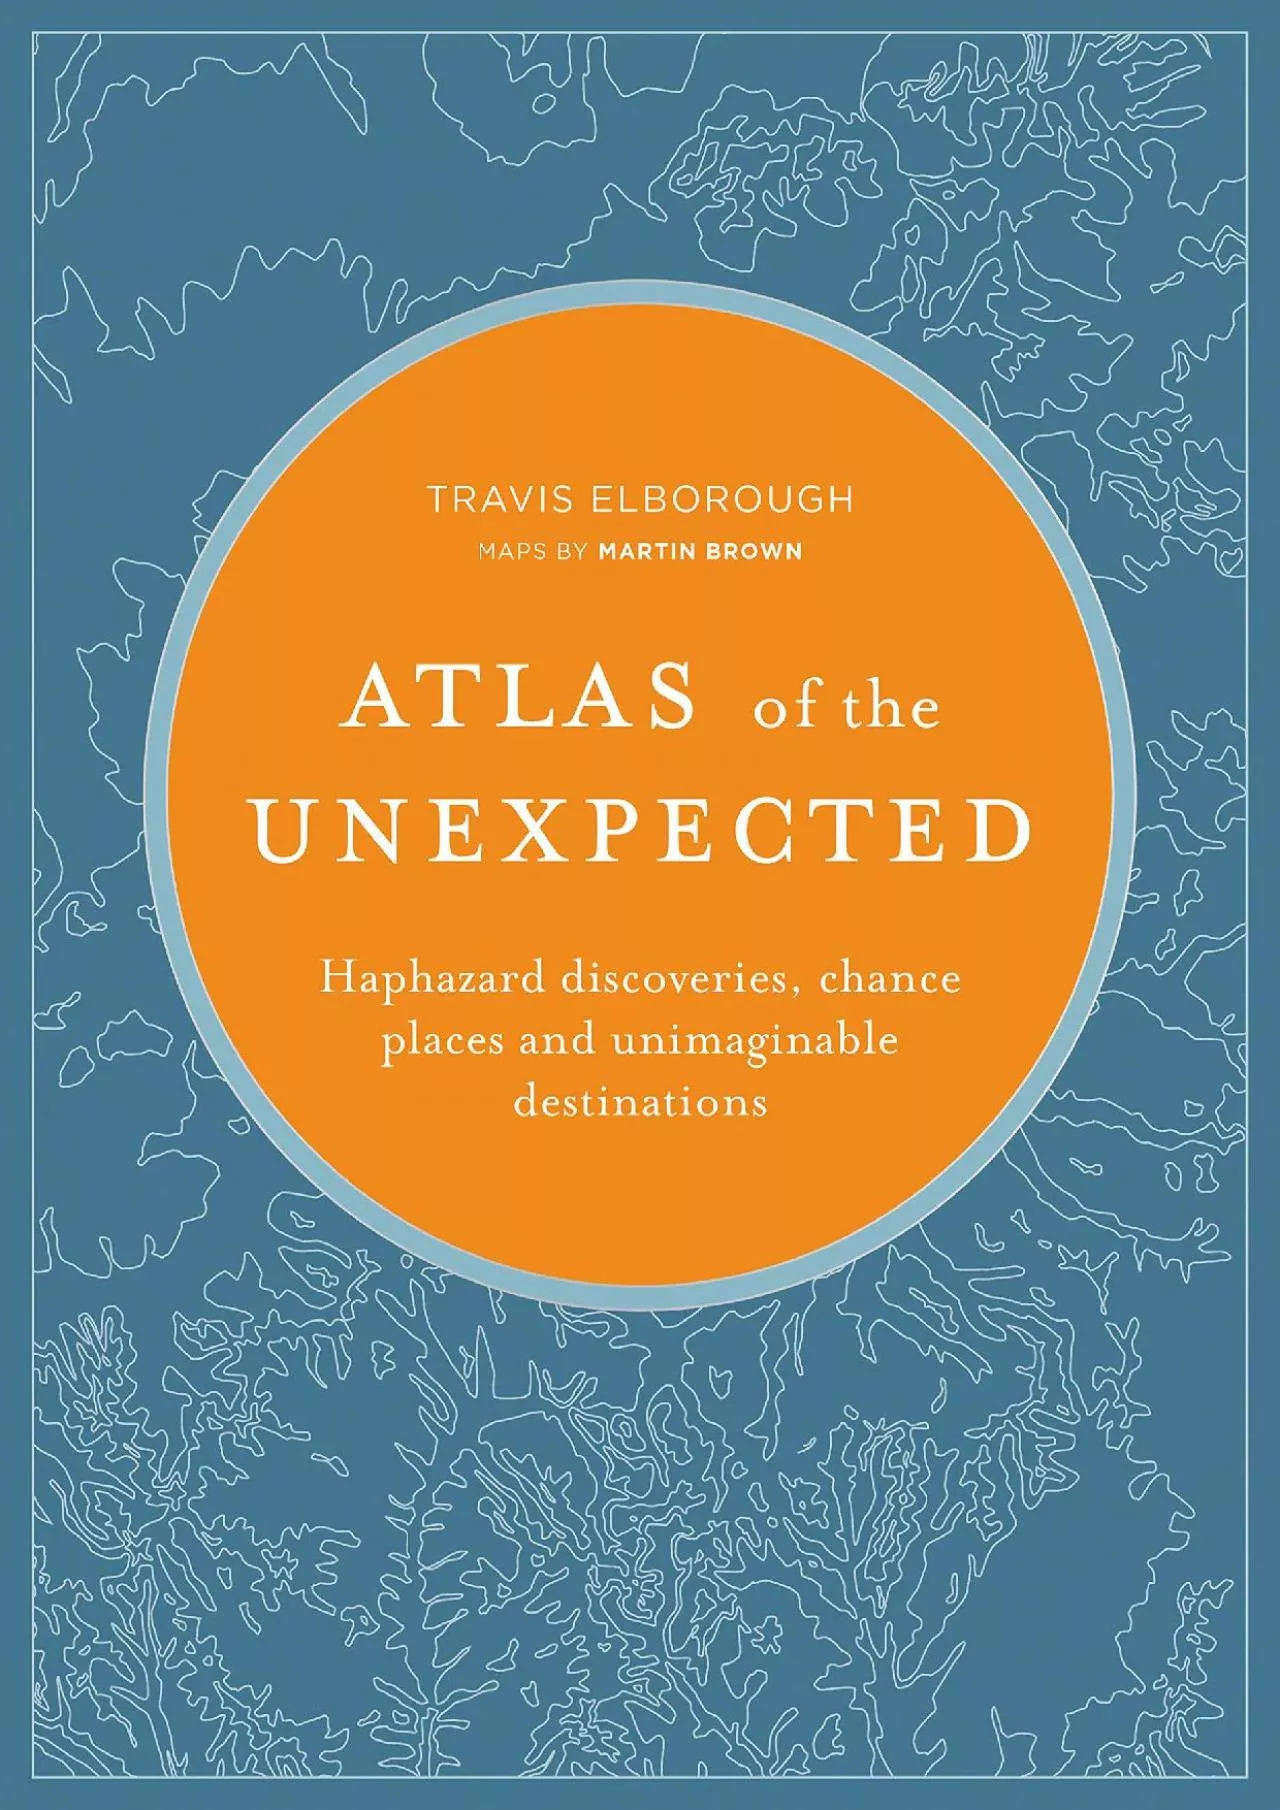 [BOOK]-Atlas of the Unexpected: Haphazard discoveries, chance places and unimaginable